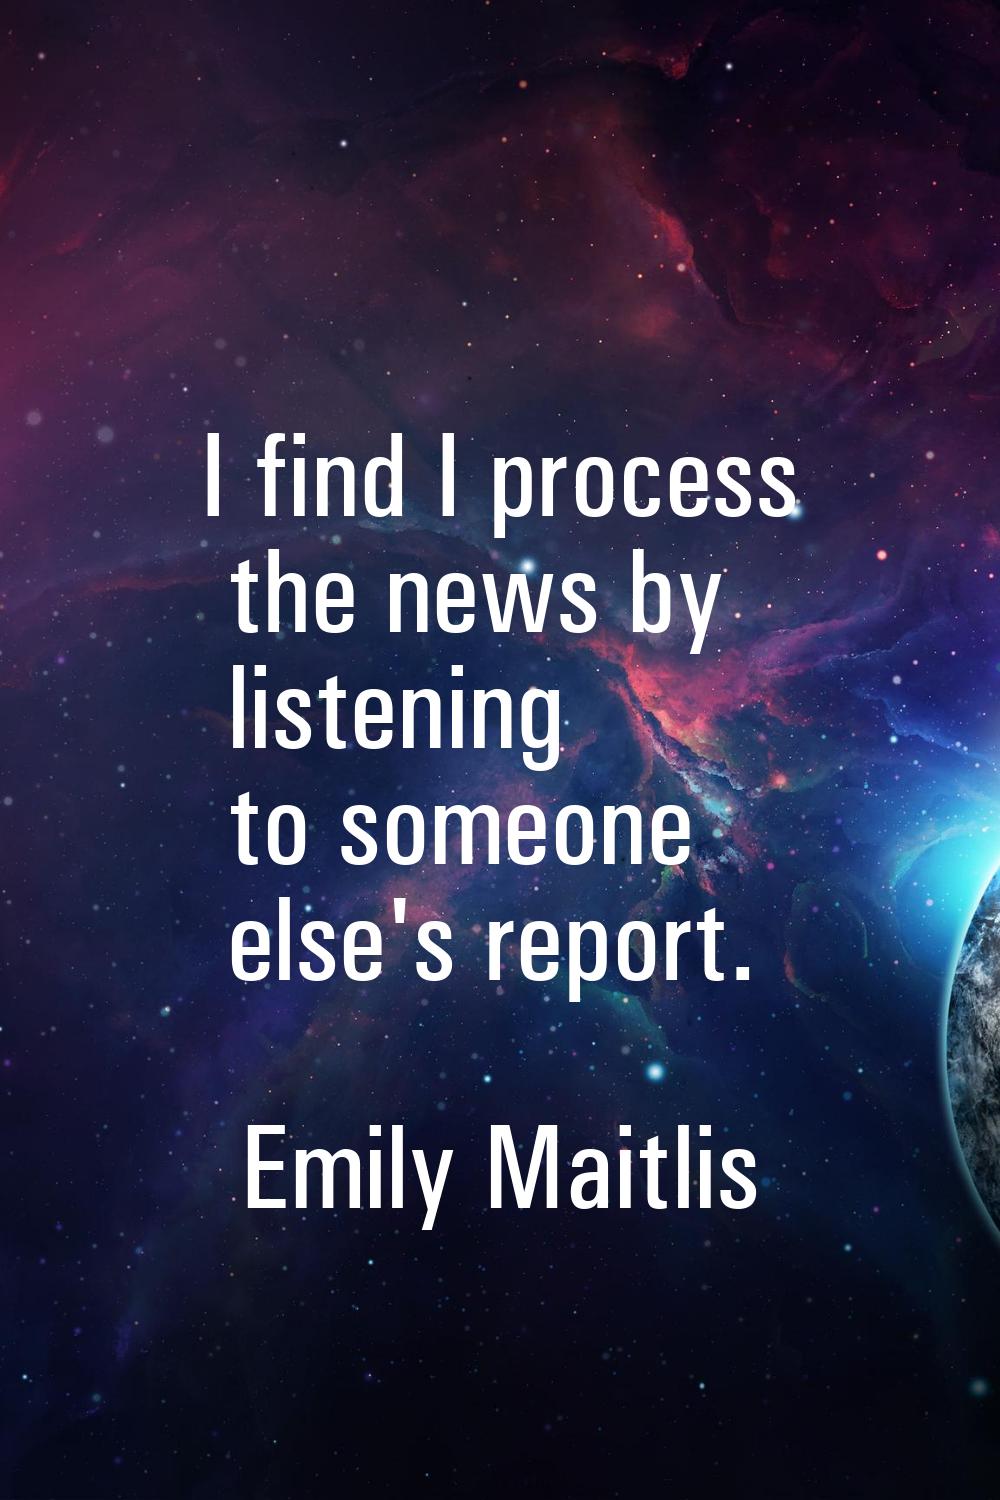 I find I process the news by listening to someone else's report.